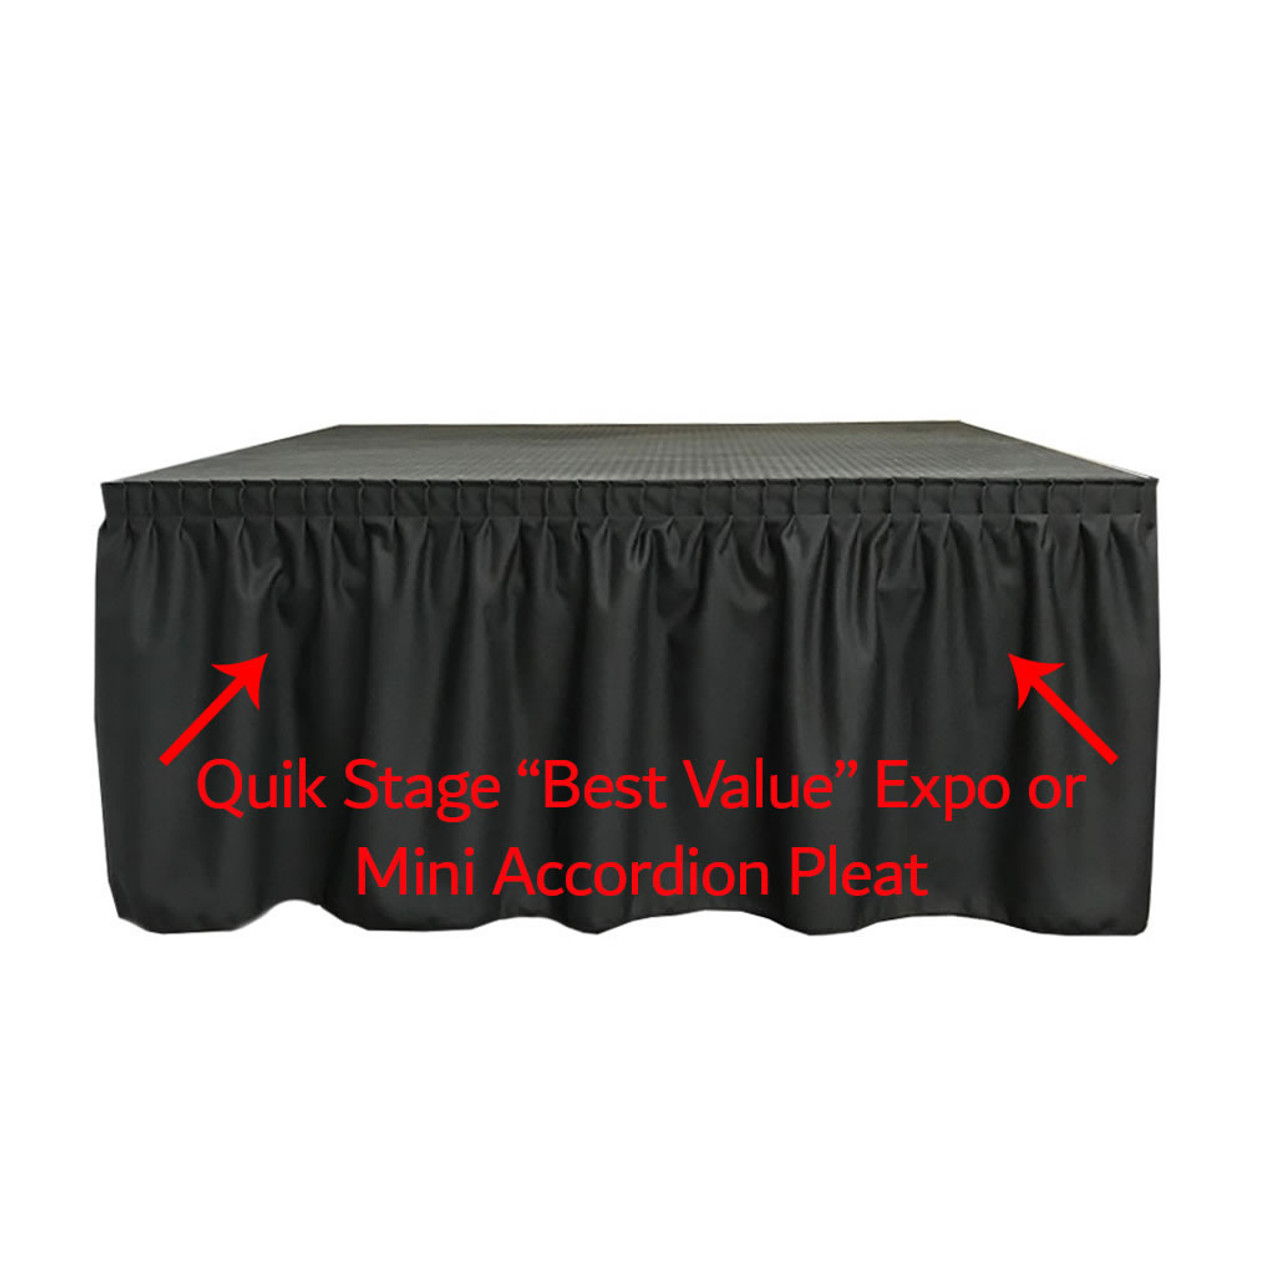 High Quality Quik Stage 12' x 20' High Portable Stage Package with Black Polyvinyl Non-Skid Surface. Additional Heights and Surfaces Available - Best Value Expo Pleat Stage Skirting